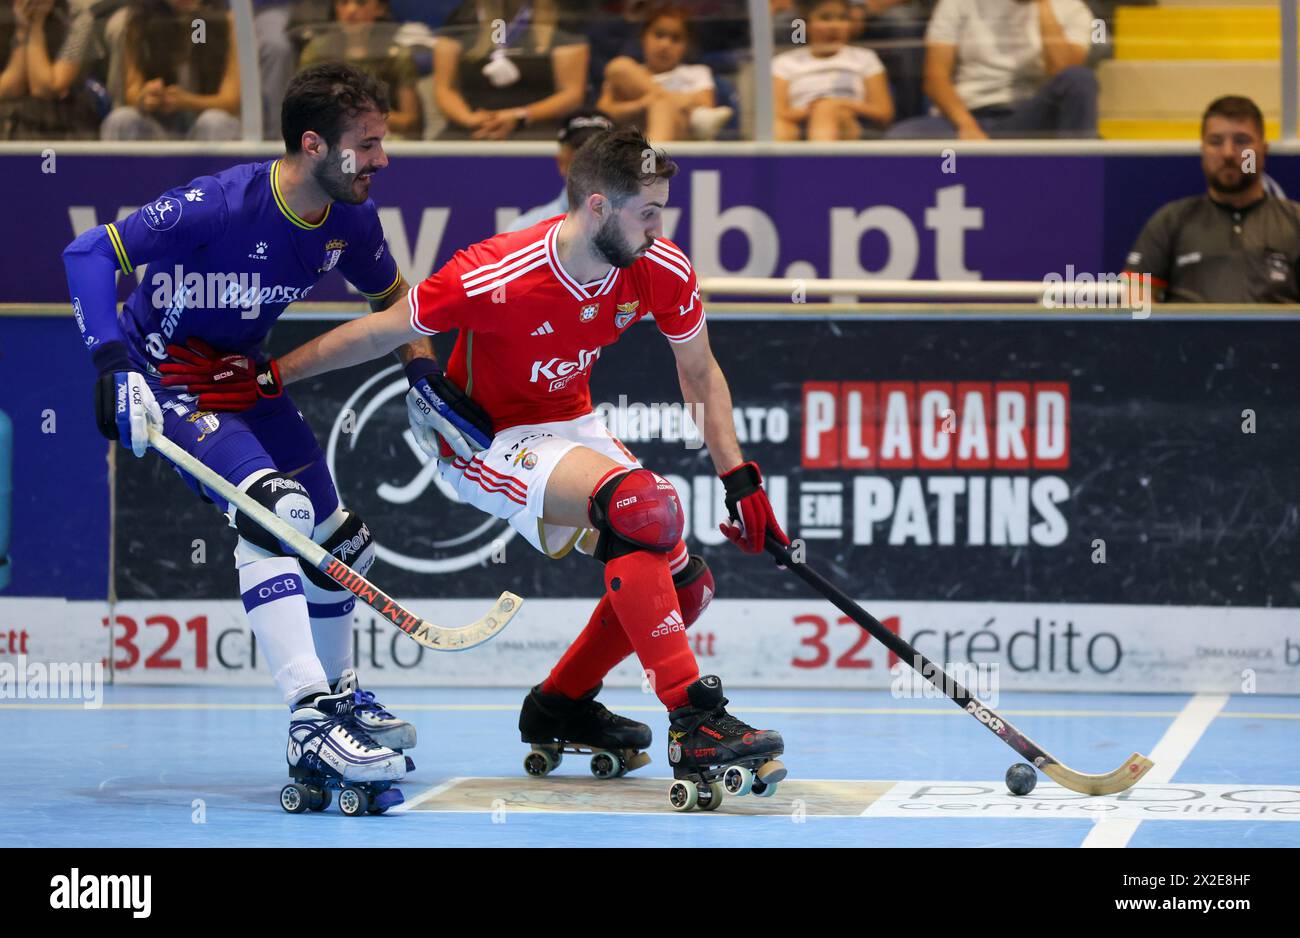 Barcelos, 04/20/2024 - Óquei Clube de Barcelos faced Sport Lisboa and Benfica this evening in the 24th round of the 2023/24 National Roller Hockey Championship. The game was played at the Barcelos Municipal Pavilion. Miguel Rocha (OC Barcelos); Roberto di Benedetto (SL Benfica) (Global Imagens) Stock Photo